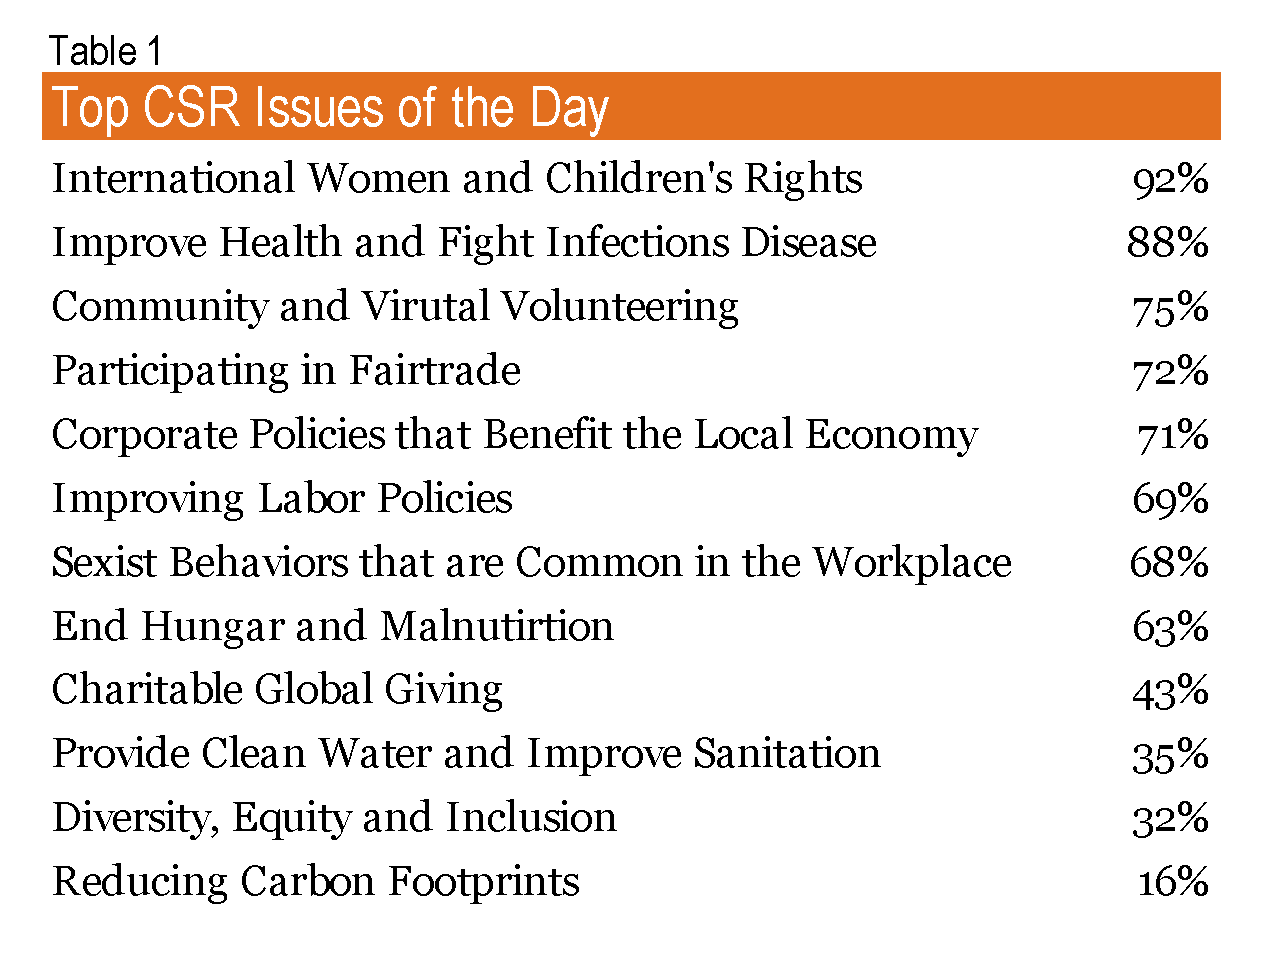 Table 1 shows a list of the 12 most relevant CSR issues and the percentage of respondents who indicated these were important issues